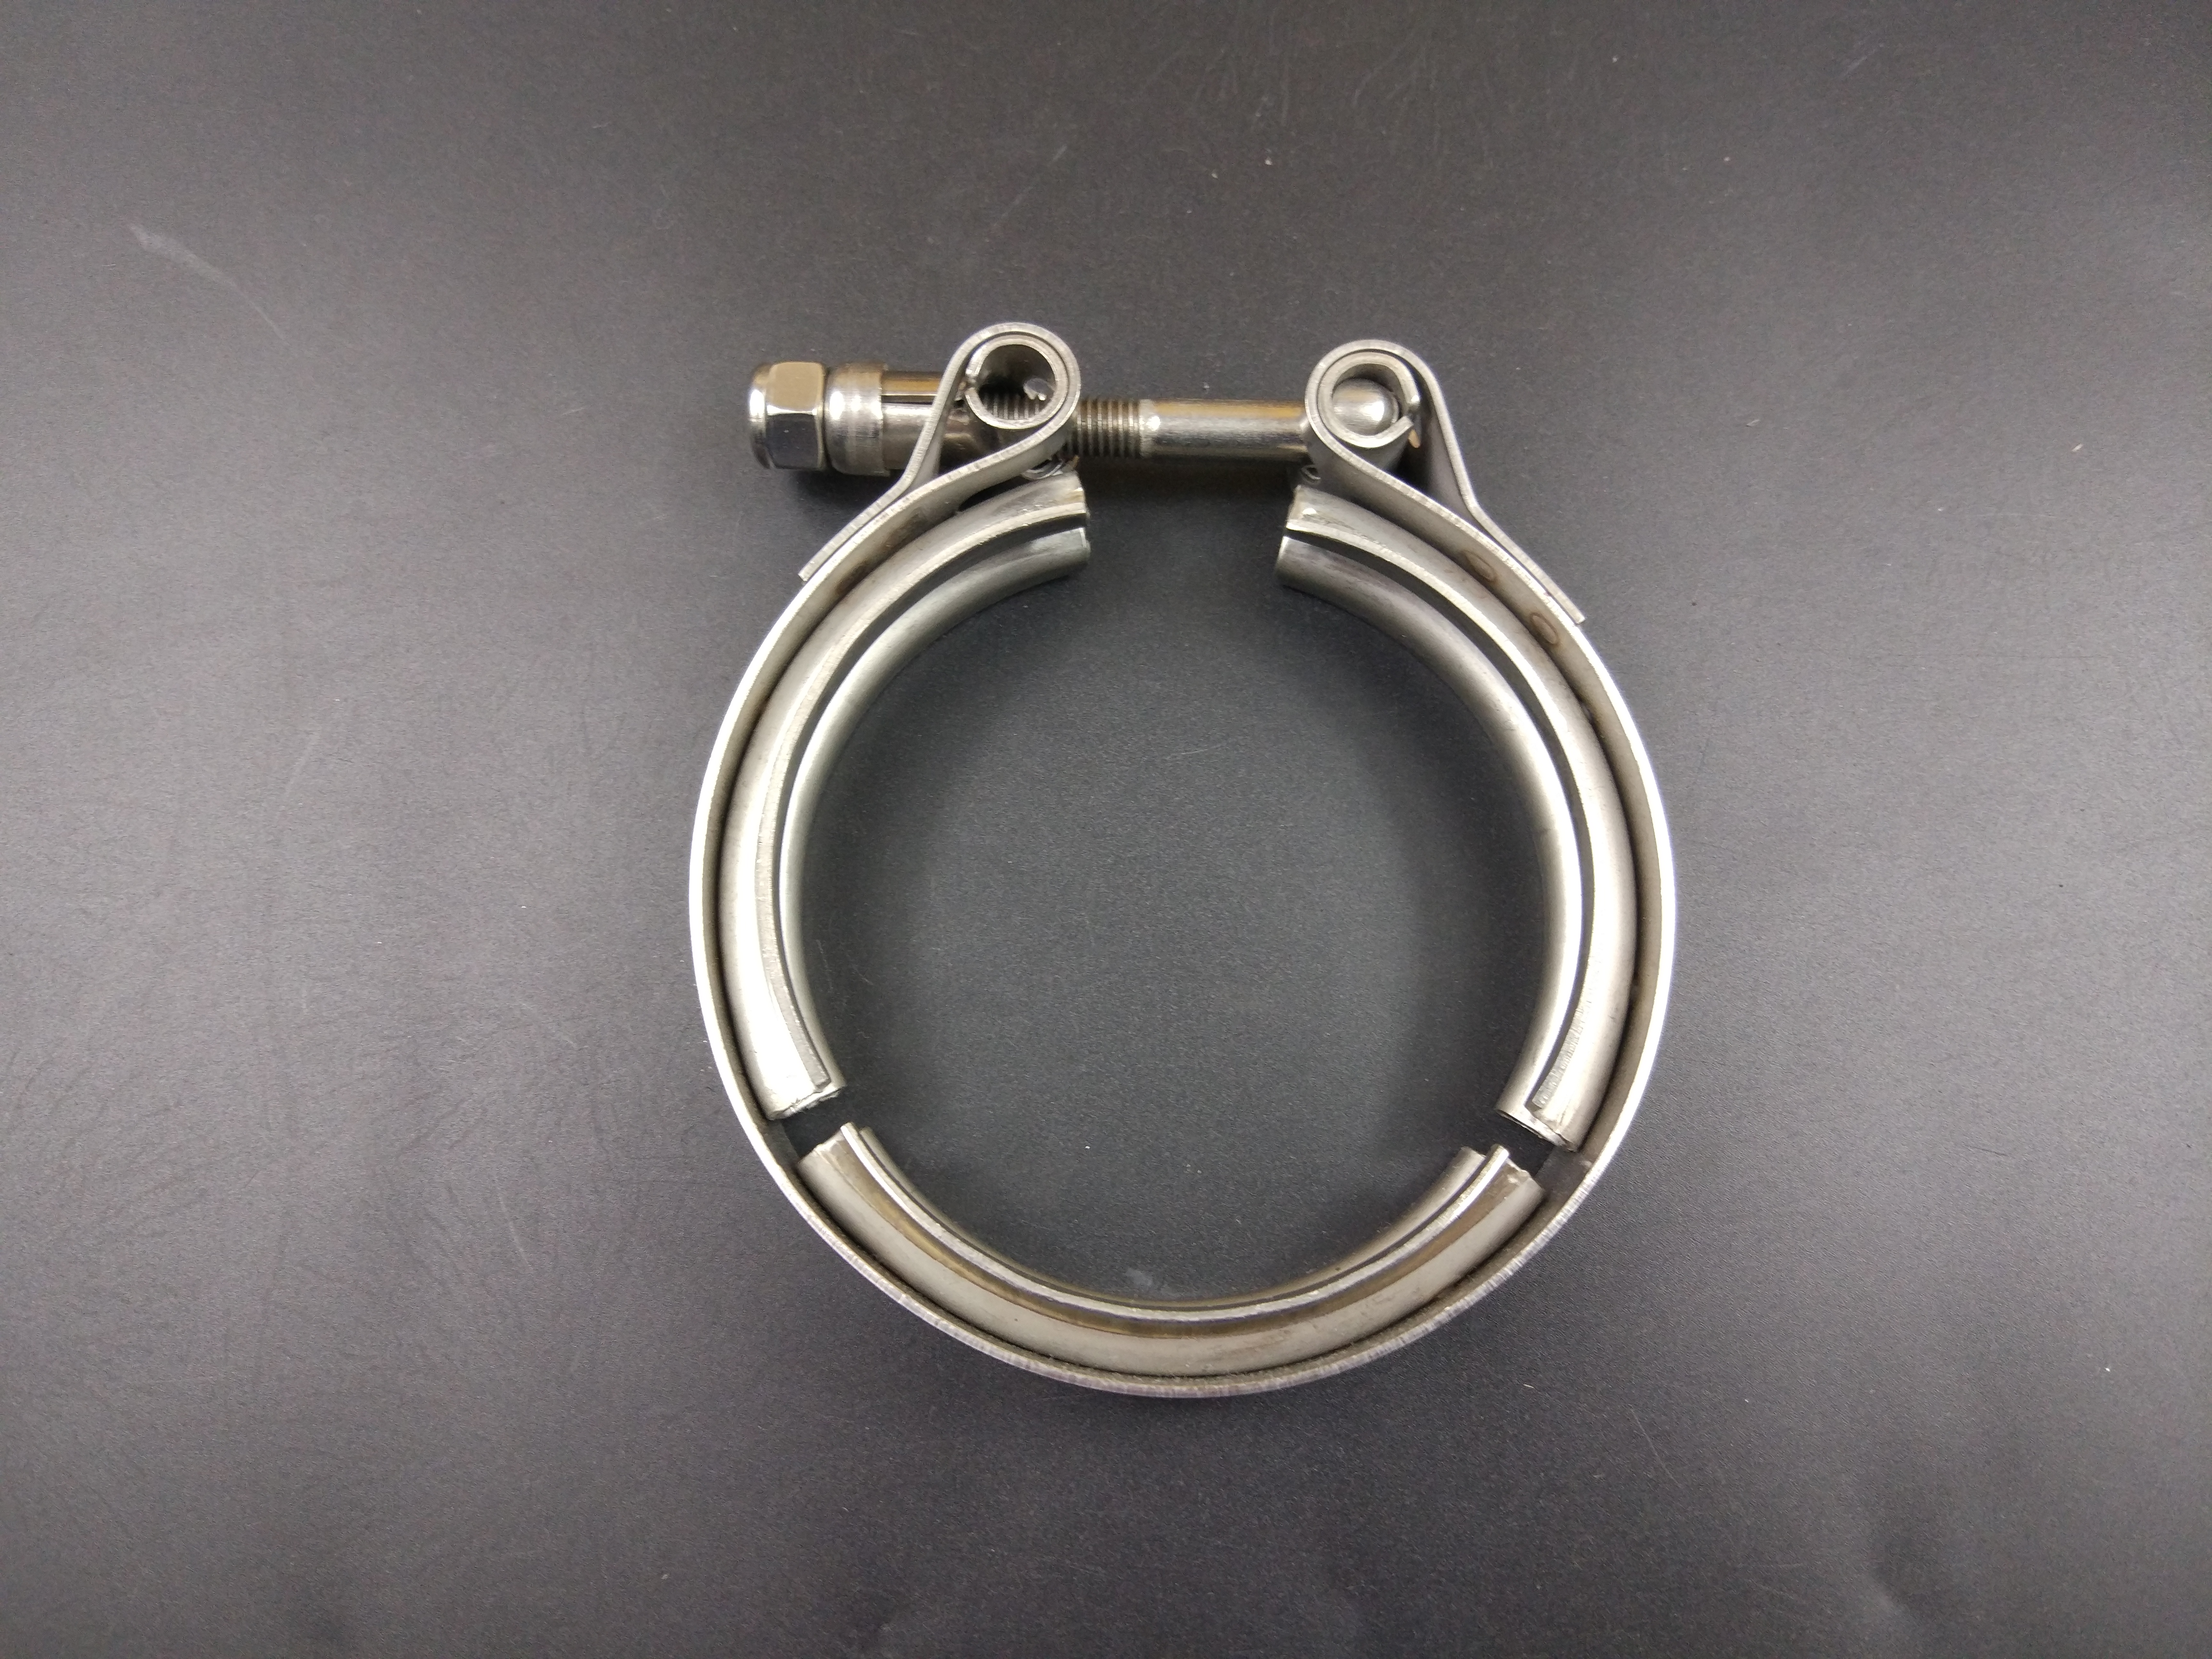 Parallel Adjustable Narrow Hose Clamps